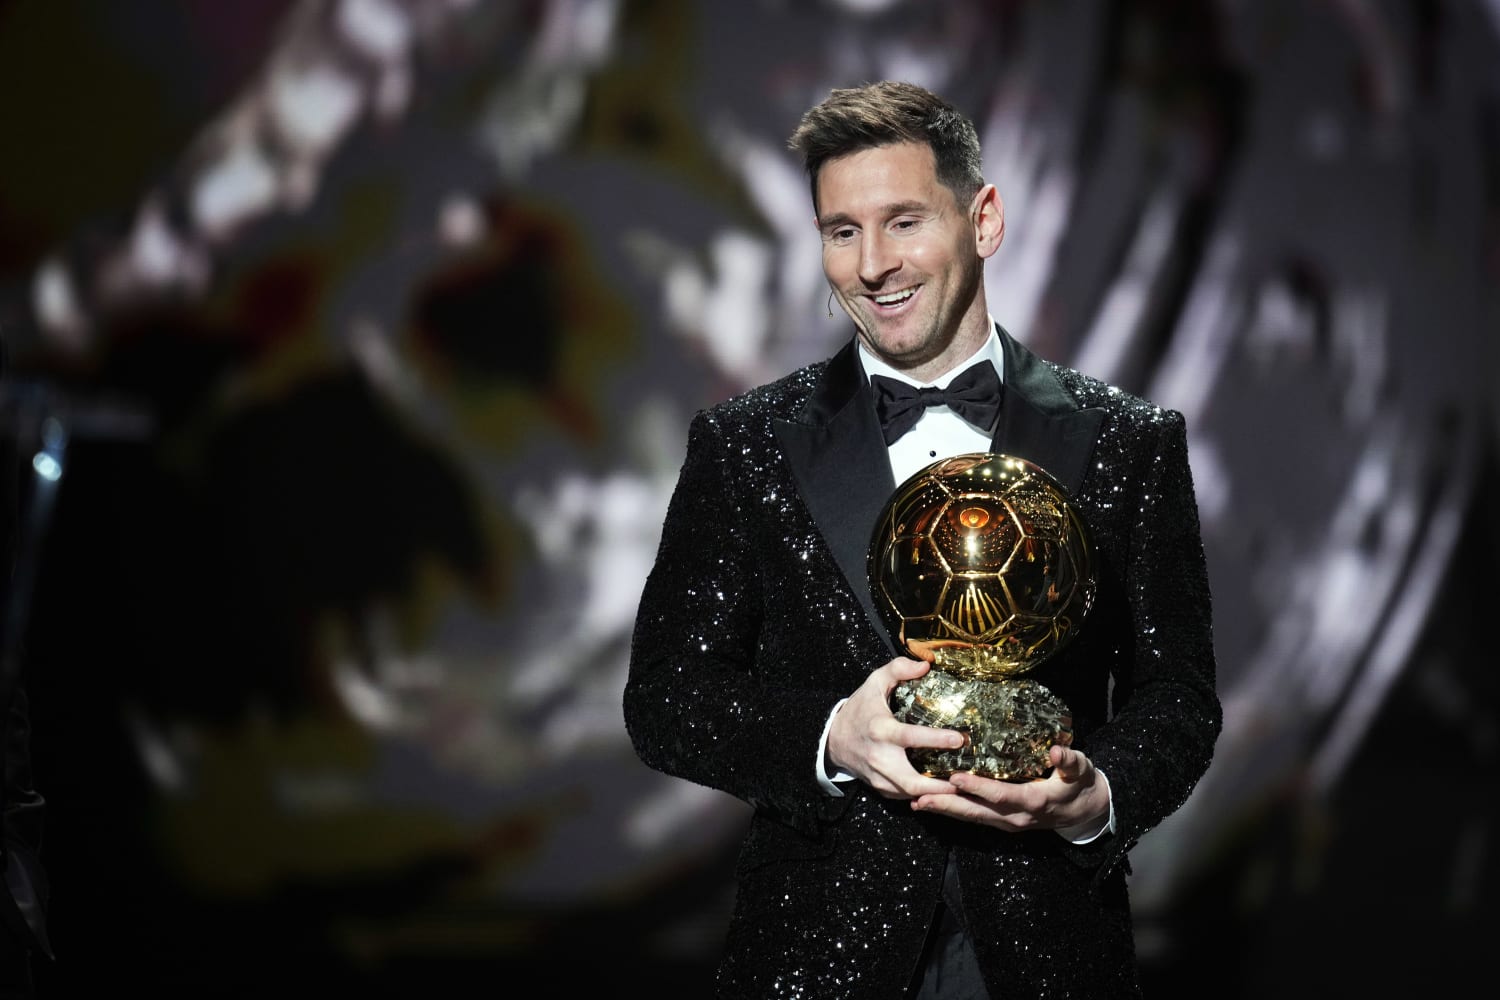 Lionel Messi wins world’s best soccer player award for seventh time